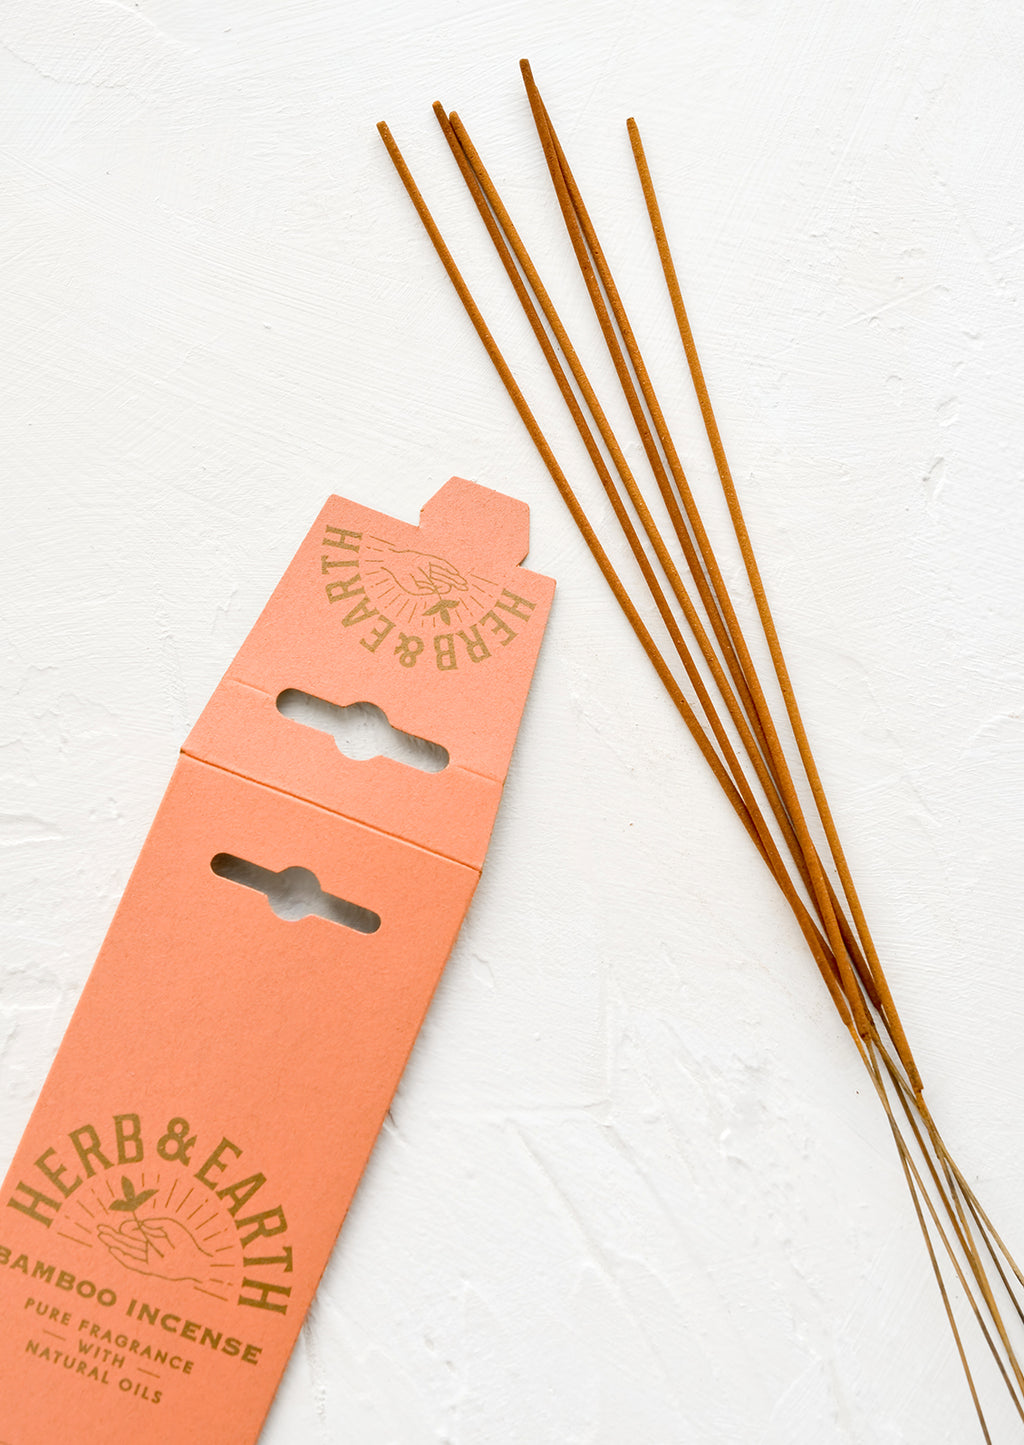 3: Long, skinny sticks of dipped incense on bamboo sticks.